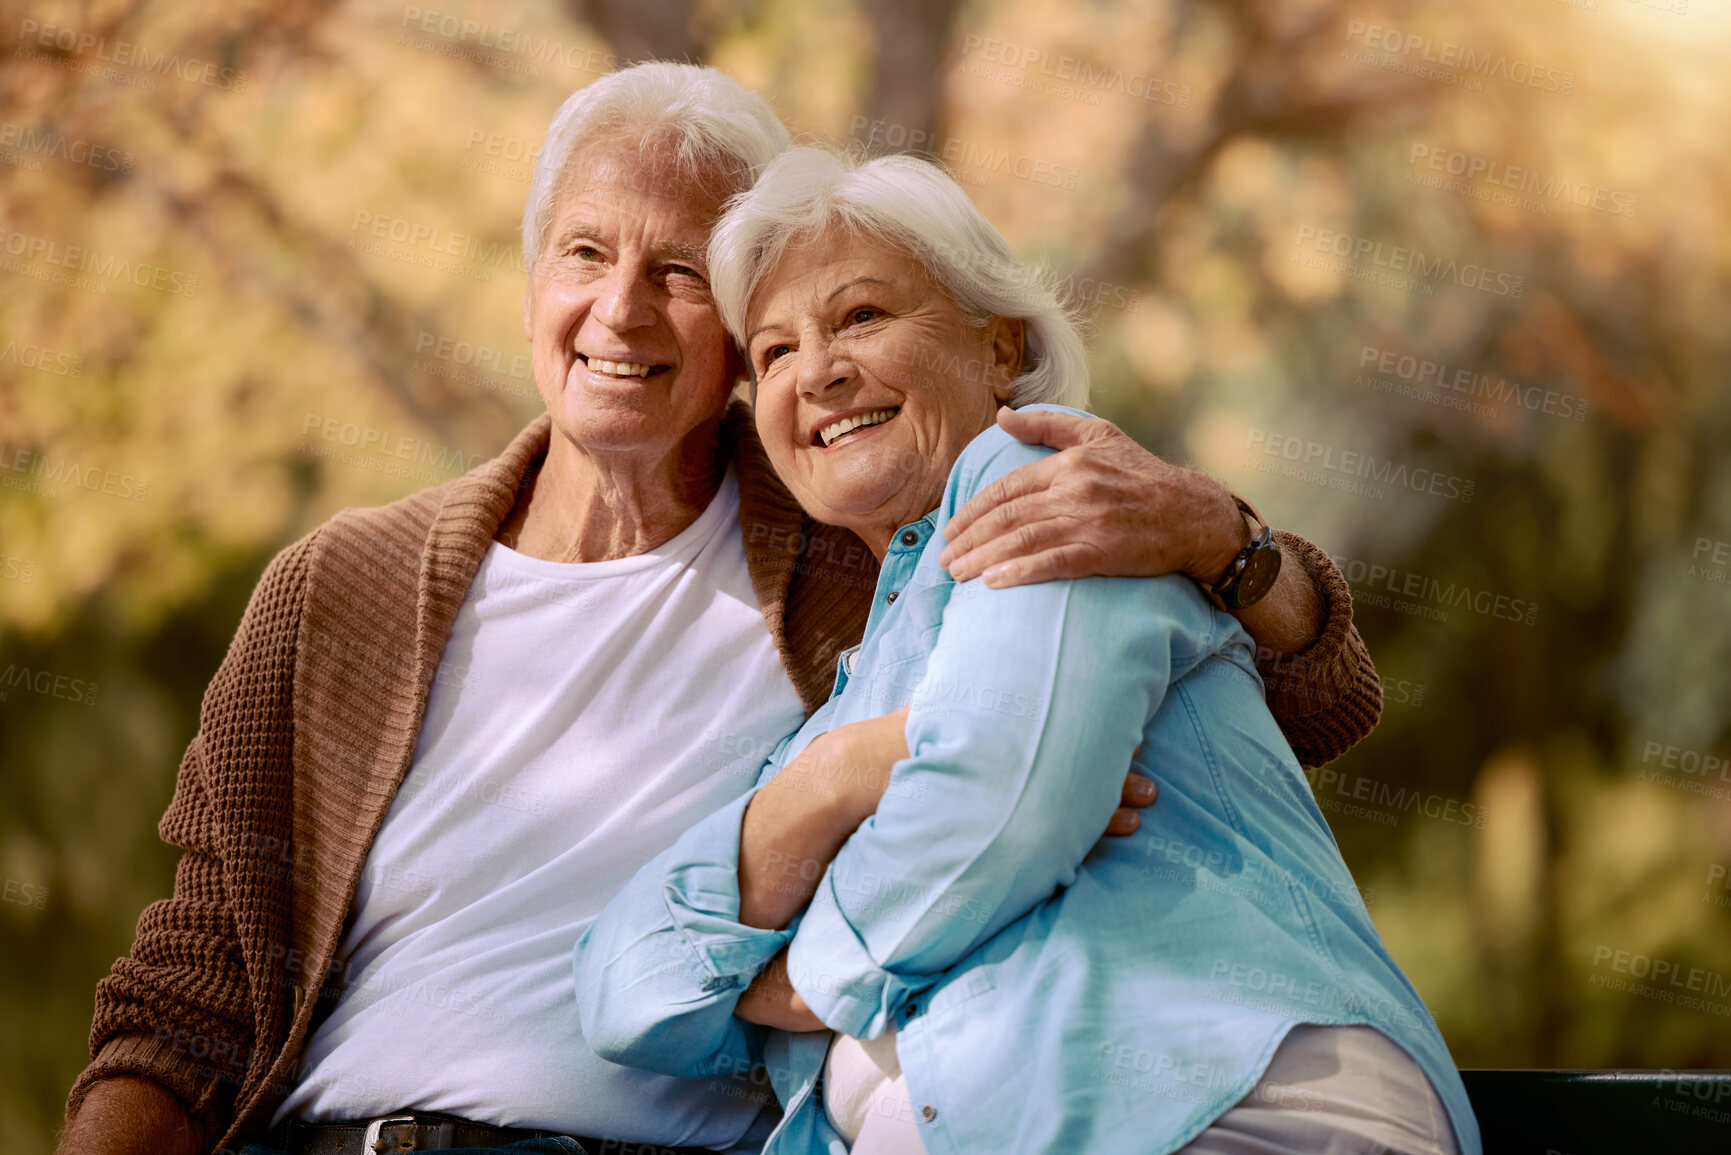 Buy stock photo Elderly, couple hug in the park with love and happy in retirement, outdoor in nature, calm and peace with view. Senior man with woman, smile and support, embrace and bonding in Boston public garden.